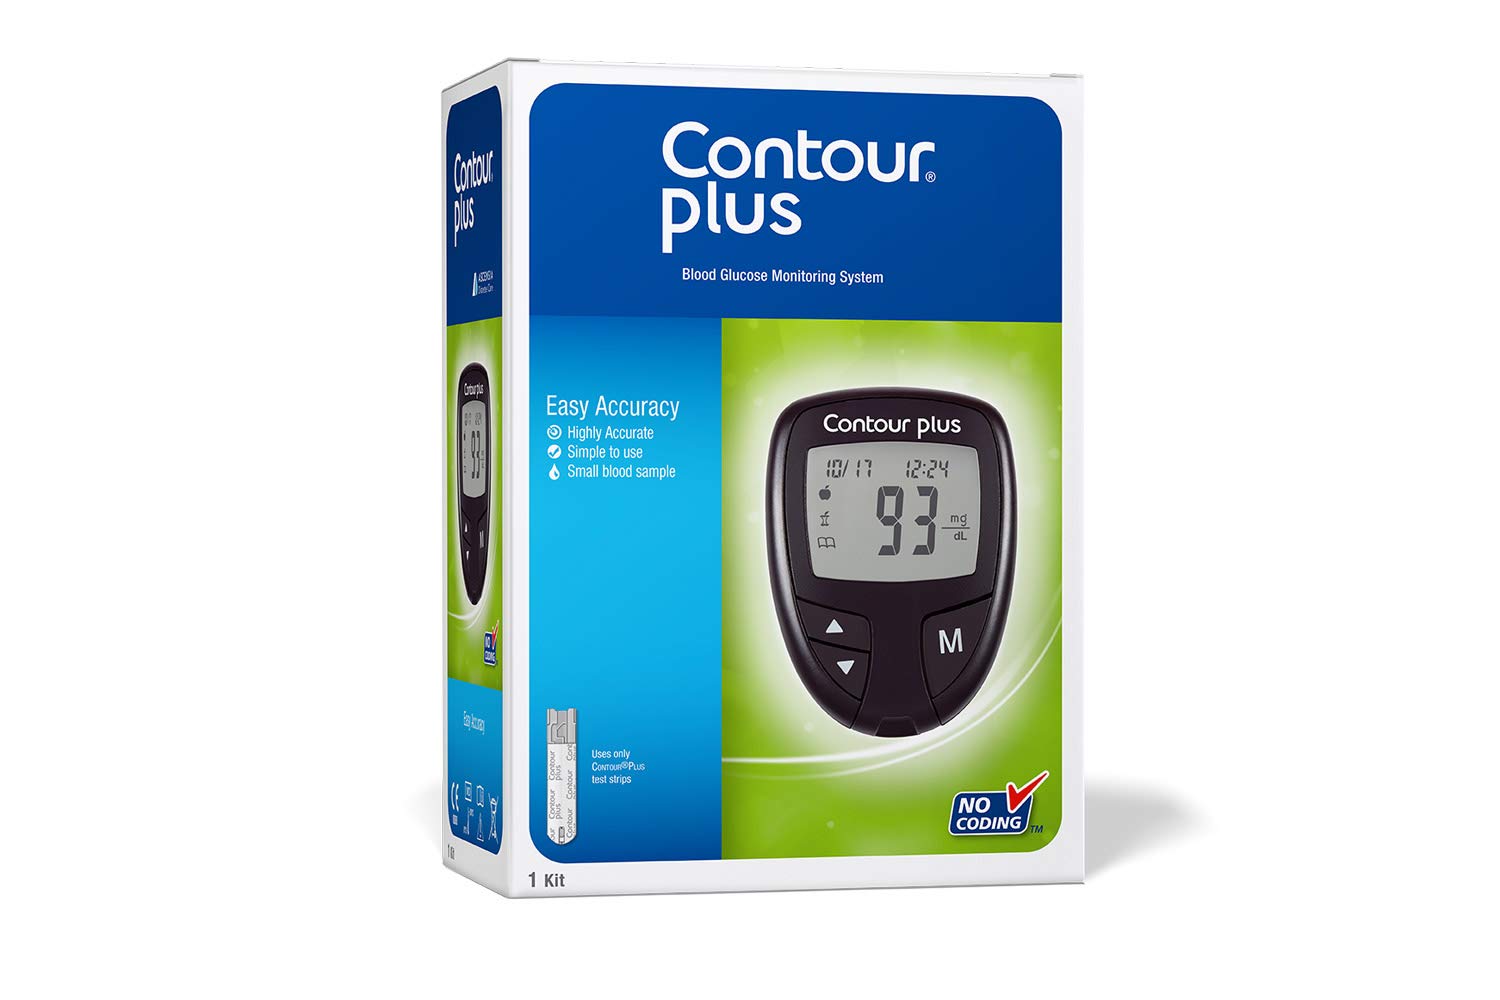 Contour Plus Blood Glucose Monitor With 10 Free Strips